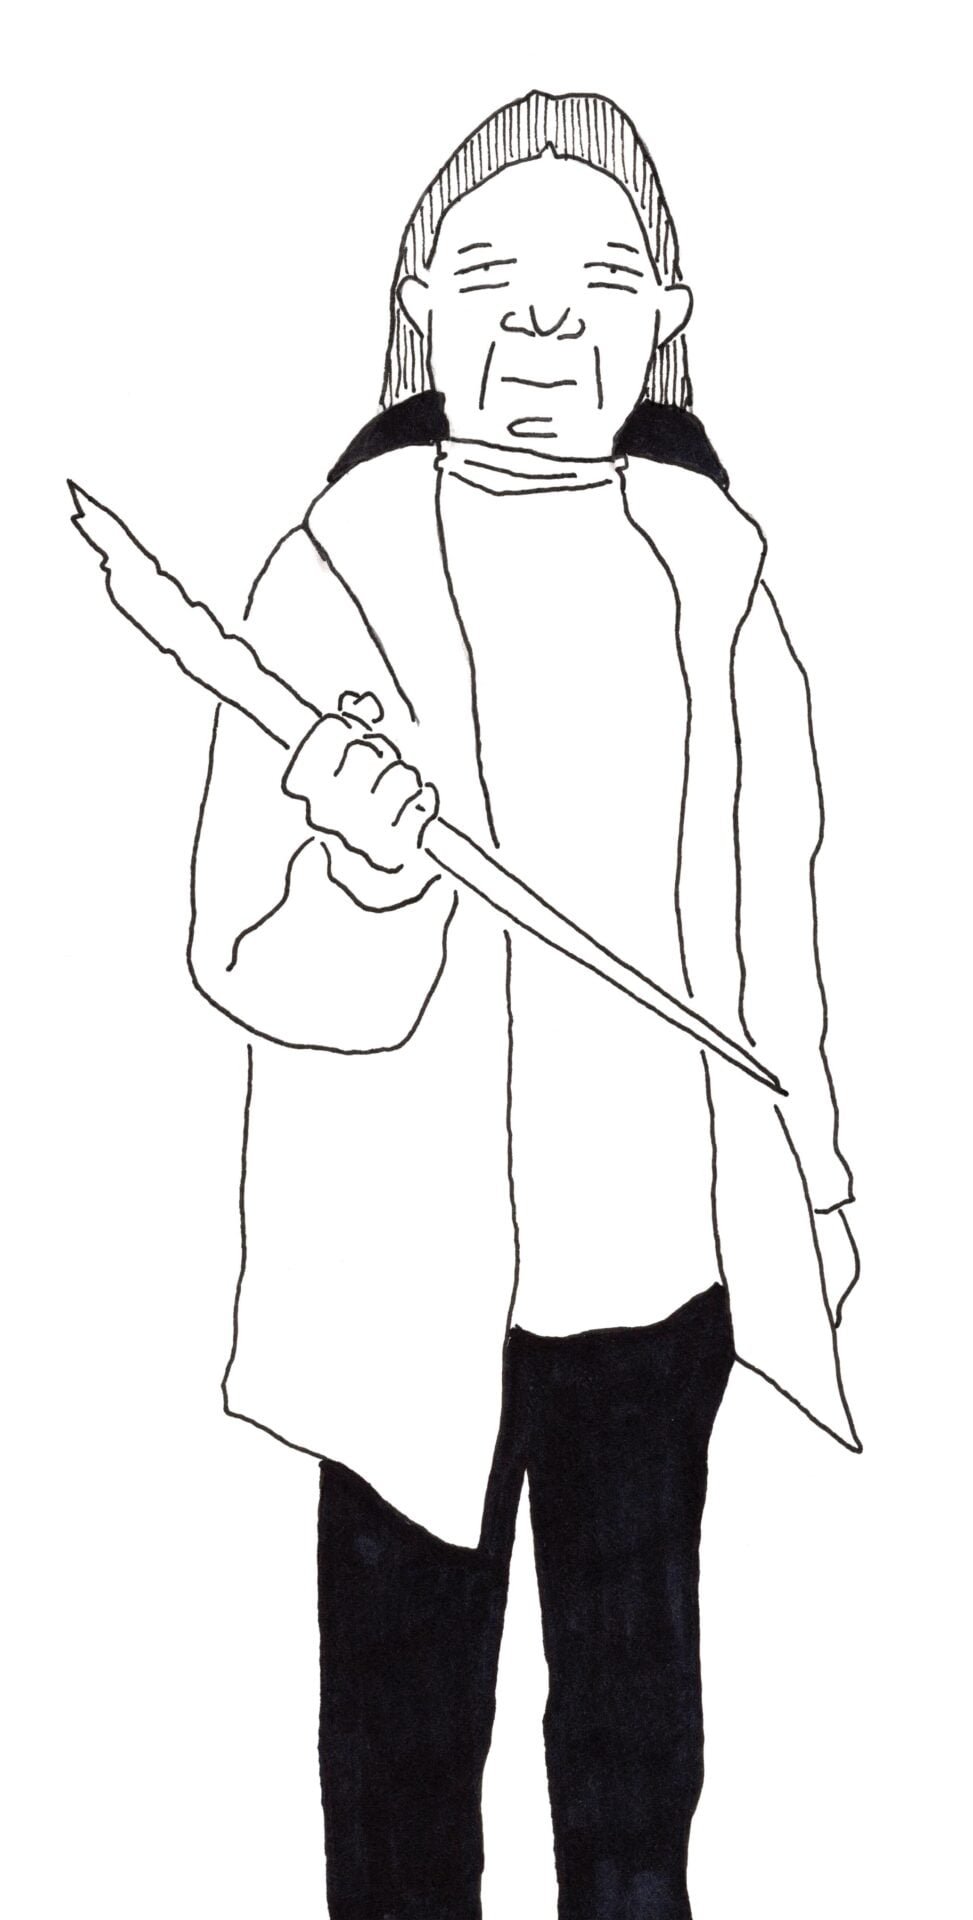 A person wearing a winter coat holding a large icicle.